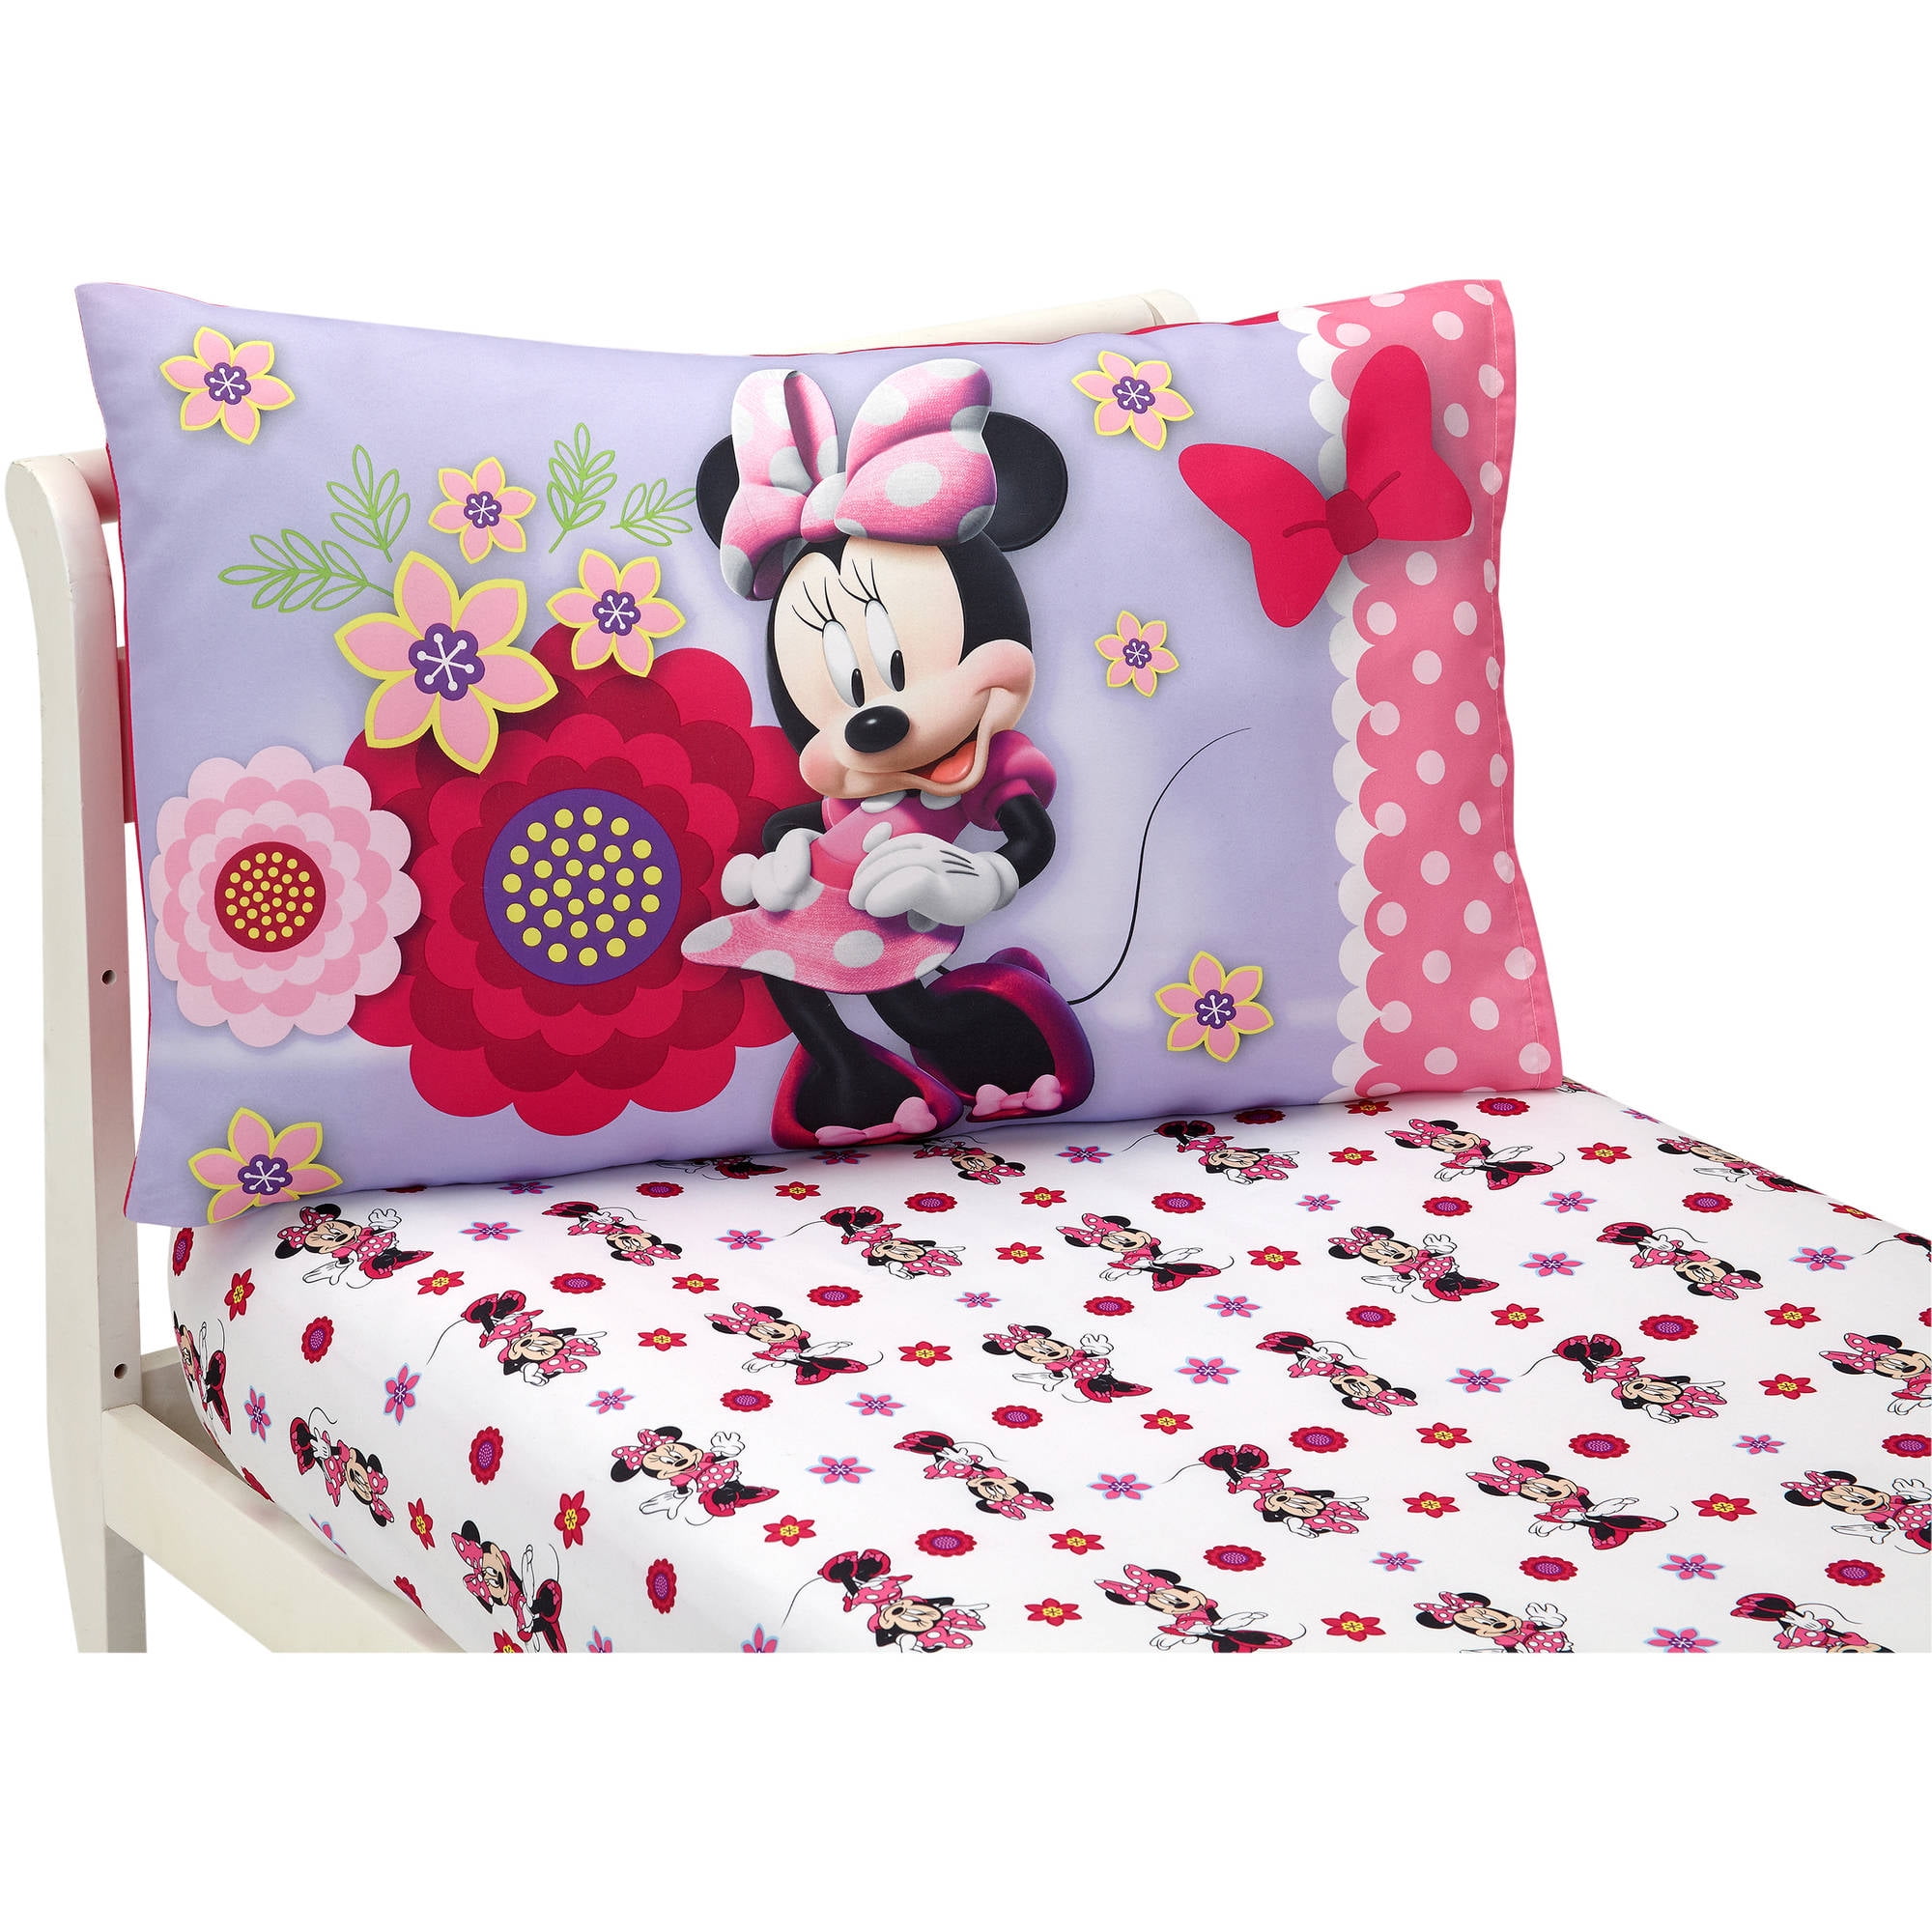 Makeover Minnie Mouse Cushion 